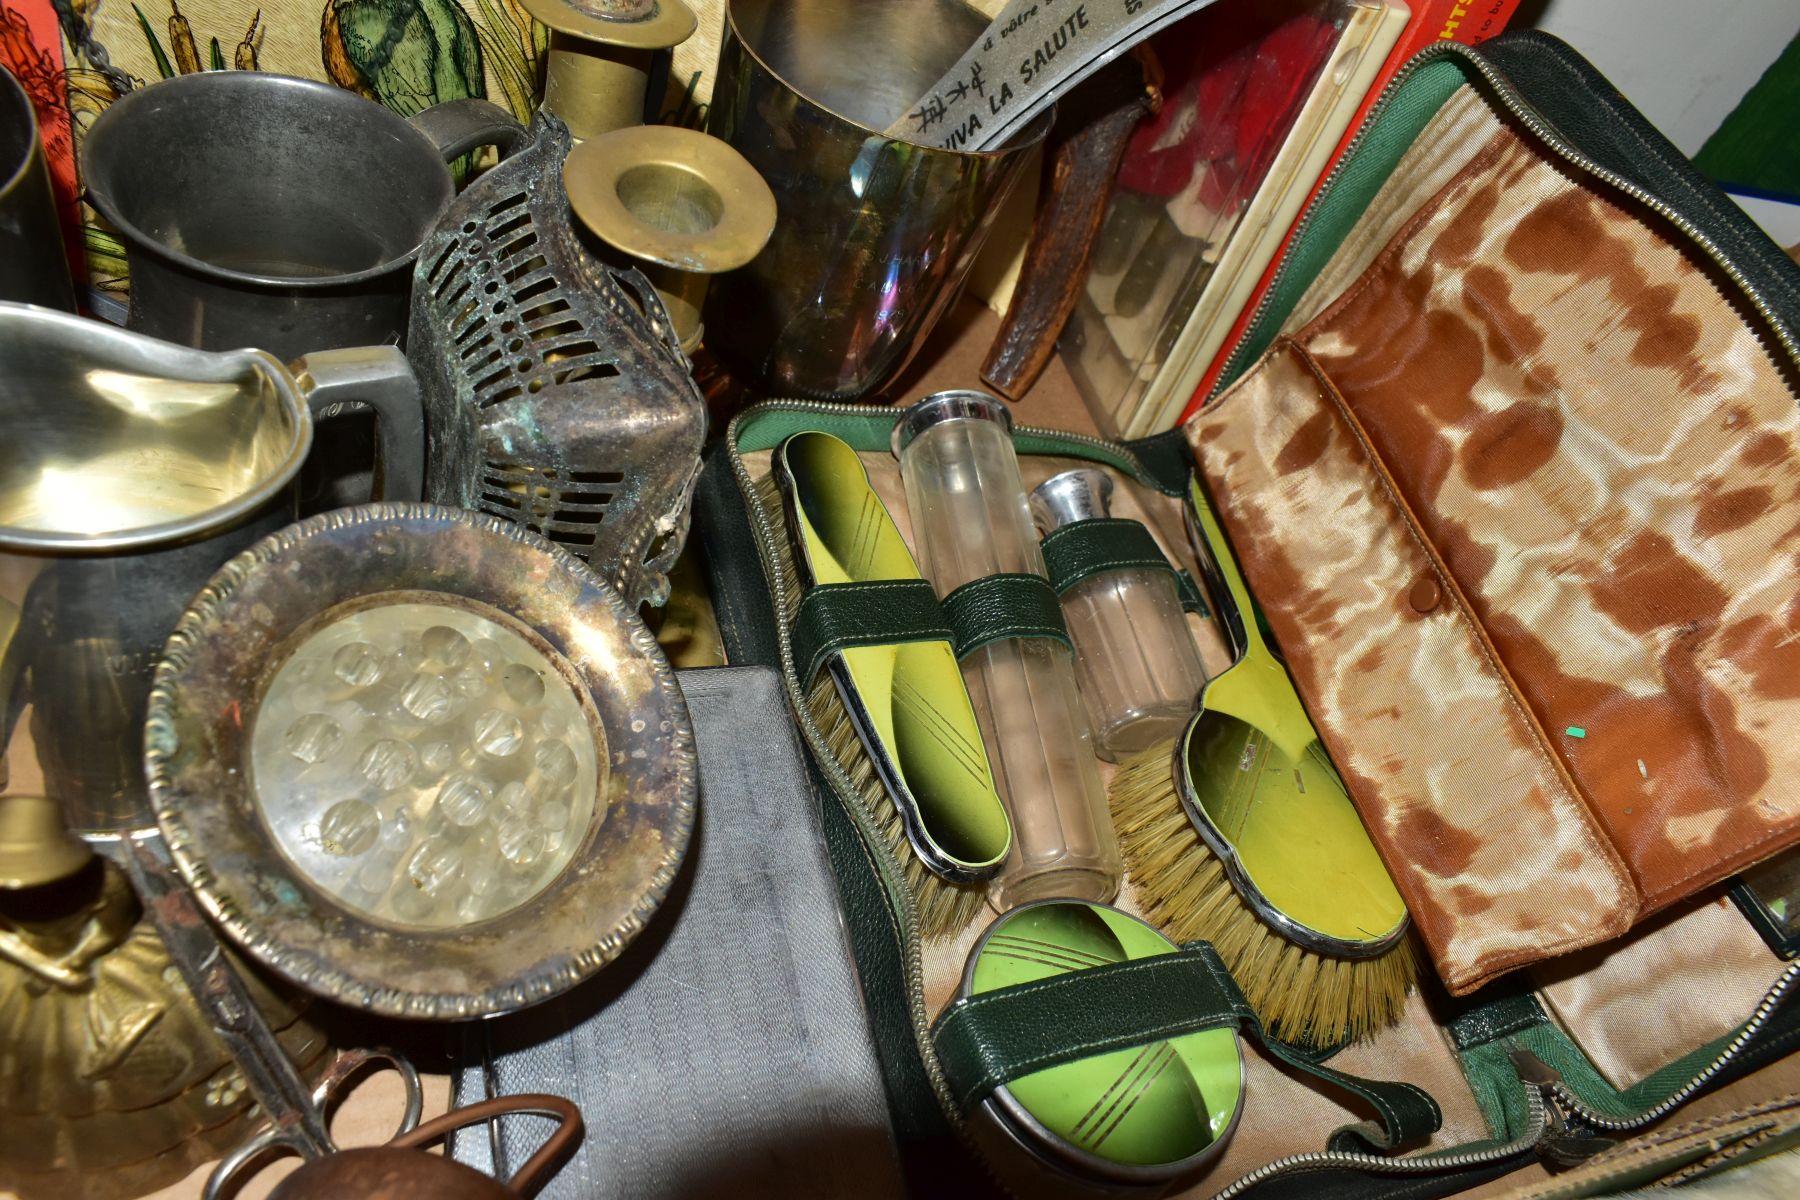 FIVE BOXES OF ART DECO DINNER SERVICE, CERAMICS, GLASS, METALWARES, MINIATURE BOTTLES AND SUNDRY - Image 9 of 16